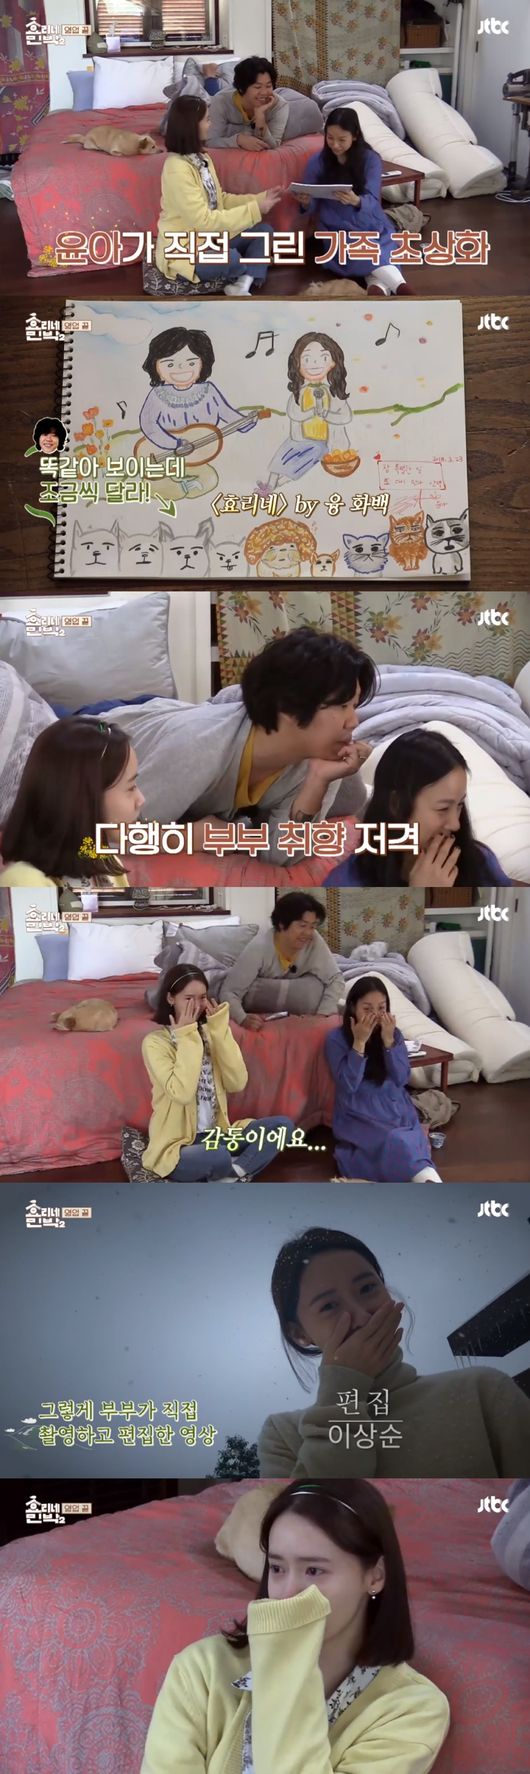 Hyorine Guest house has closed its second Guest house.When he also may be able to meet Lee Hyori and Lee Sang-soon of Jeju Island, he is leaving more regret.On the 13th, JTBCs Hyorine Guest house said goodbye to Lee Hyori, Lee Sang-soon and employee Im Yoon-ah after dropping down the door of Guest House.The three people who met in winter broke up in a warm spring.On this day, the broadcast was the last day of Guest house house, and three people were filled with regret all day long.Lee Hyori and Im Yoon-ah were able to go to the beach together thanks to the biker team, and Lee Hyori told Im Yoon-ah to say what he wanted to say.Im Yoon-ah expressed his gratitude to Lee Hyori, saying, I was so sorry that I was not so formal, but I was so grateful for being so comfortable and being like a close sister, not my sister.Lee Hyori, Lee Sang-soon, and Im Yoon-ah took the last walk and talked that they had not done.I talked about the life of Jeju Island, and Im Yoon-ah said, So ordinary and ordinary things seem to me rather special, and Lee Hyori expressed his affection for Im Yoon-ah, So do you live in my house?And Lee Hyori, Lee Sang-soon, Im Yoon-ah had their own farewell time in the situation where they had only three guests to spend.Lee Sang-soon said, When do you go now? Im Yoon-ah said, I have to come back again.Lee Hyori said, Everyone is coming to play and does not come. Im Yoon-ah said, I hope the next three will come.Lee Hyori said, Is this what Im waiting for my sons and daughters to work in Seoul? It was a full-on affection for Im Yoon-ah, IU, and Park Bo-gum.Im Yoon-ah presented a painting for Lee Hyori, Lee Sang-soon and his wife.Lee Hyori showed his paintings that he painted small pictures. Im Yoon-ah impressed the two people with the picture that I thought of Lee Hyori and Lee Sang-soon family.It does not have a particularly great painting ability, but the painting was special, thinking about Lee Hyori, Lee Sang-soon, dogs, and companions.Lee Hyori, Lee Sang-soon made and presented a music video for Im Yoon-ah.Lee Hyori does not like to take videos as usual, but for Im Yoon-ah, and Lee Sang-soon challenged video editing for the first time, giving him a music video for Im Yoon-ah, and Im Yoon-ah shed tears in gratitude.Season 2, which was special for the winter and spring of Jeju Island, Im Yoon-ah and Park Bo-gum. Im Yoon-ah said that the next three would be good.Im Yoon-ah, IU and Park Bo-gum are expected to see a day when they can be seen together in Hyorine Guest House.JTBC Hyoriene Guest House 2 screen capture